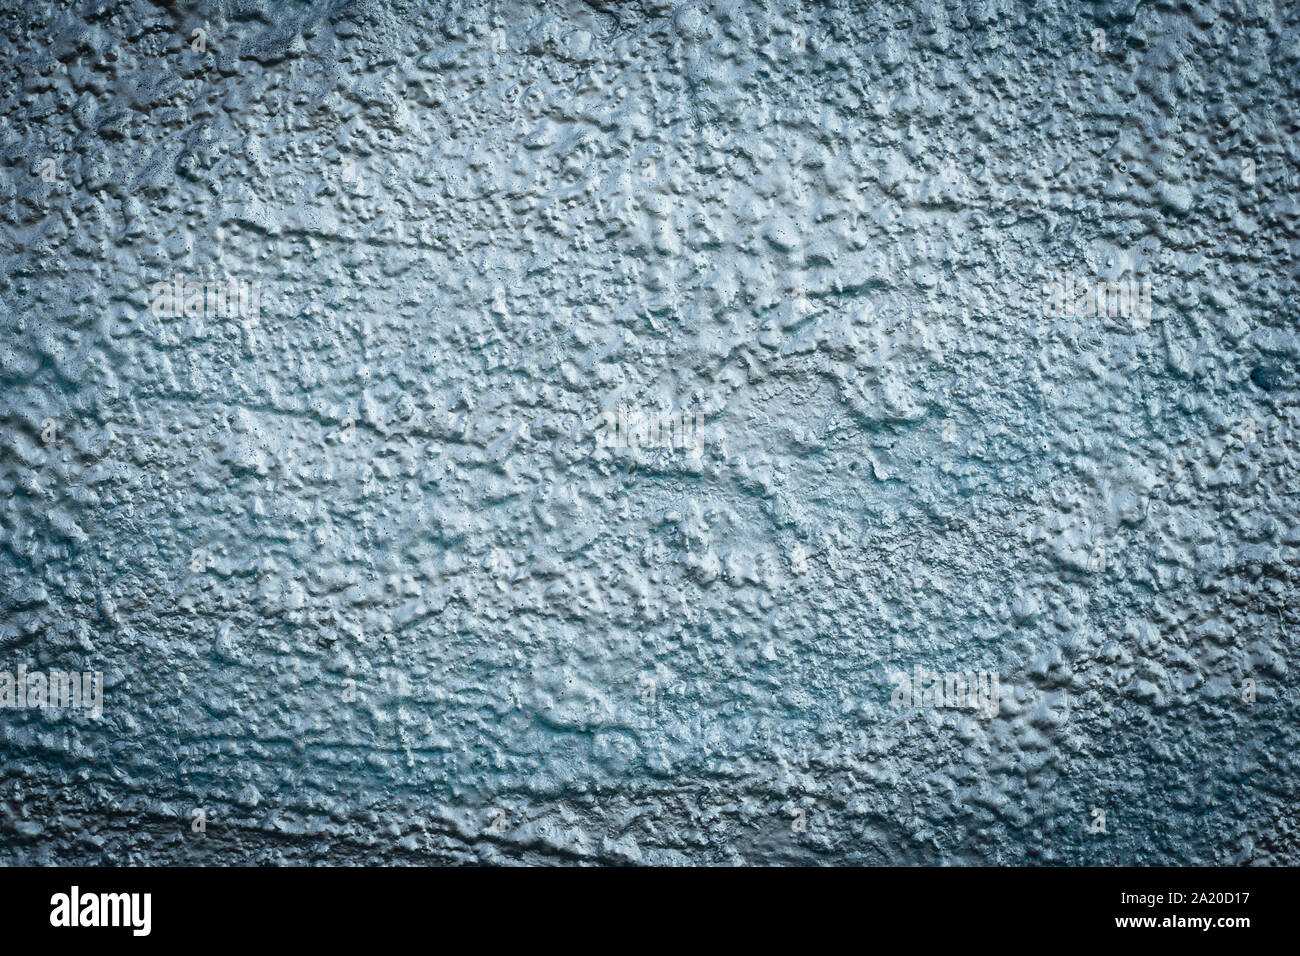 Gray shiny concrete background. Cement texture of blue wall. Grey rough painted grunge wall. Old raggy surface with metallic gloss. Abstract architect Stock Photo